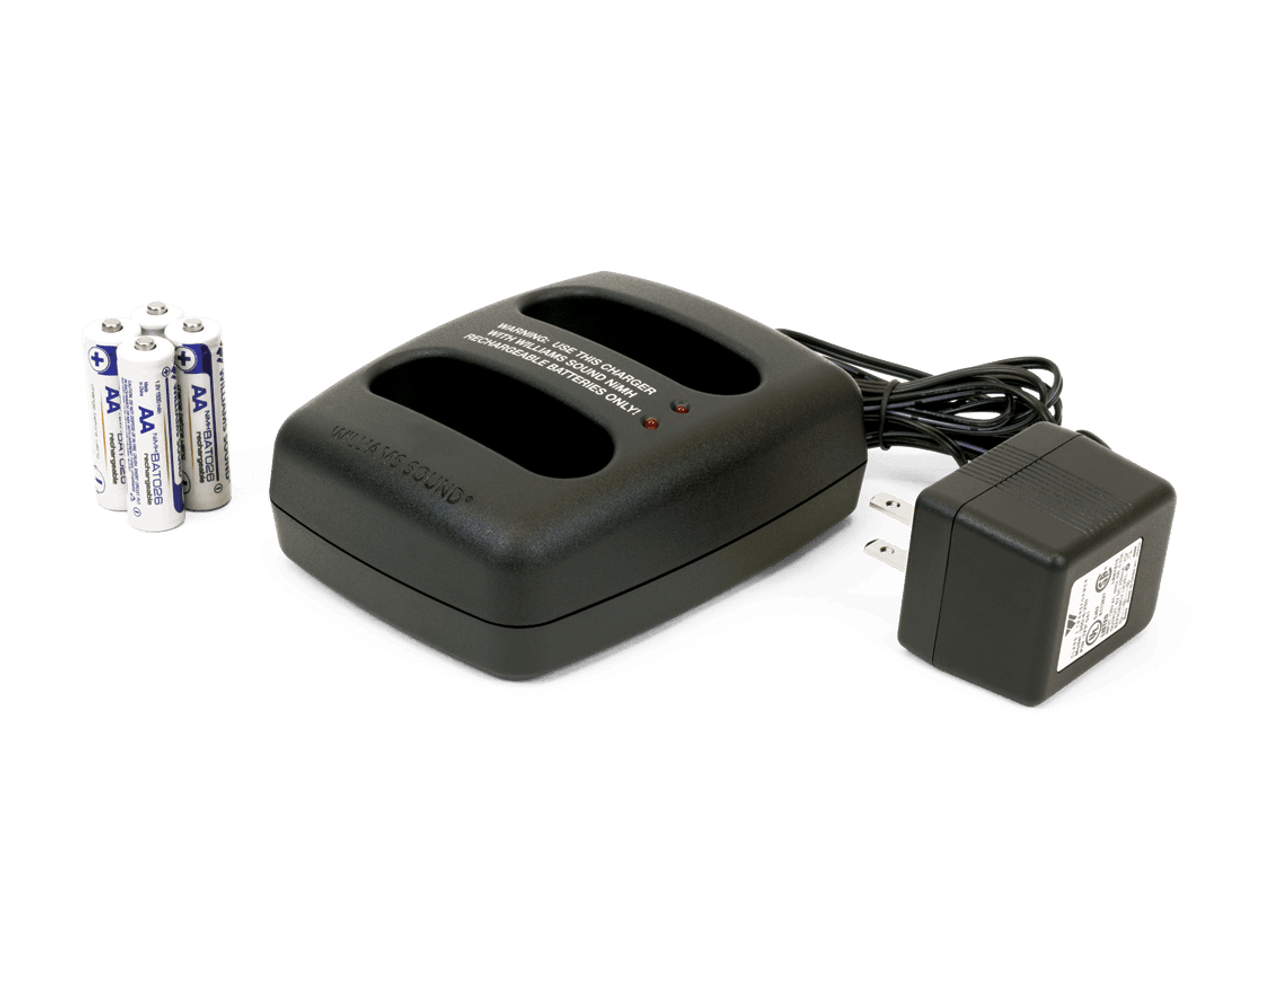 Wiliams BAT KT6 two-bay charger and rechargeable batteries